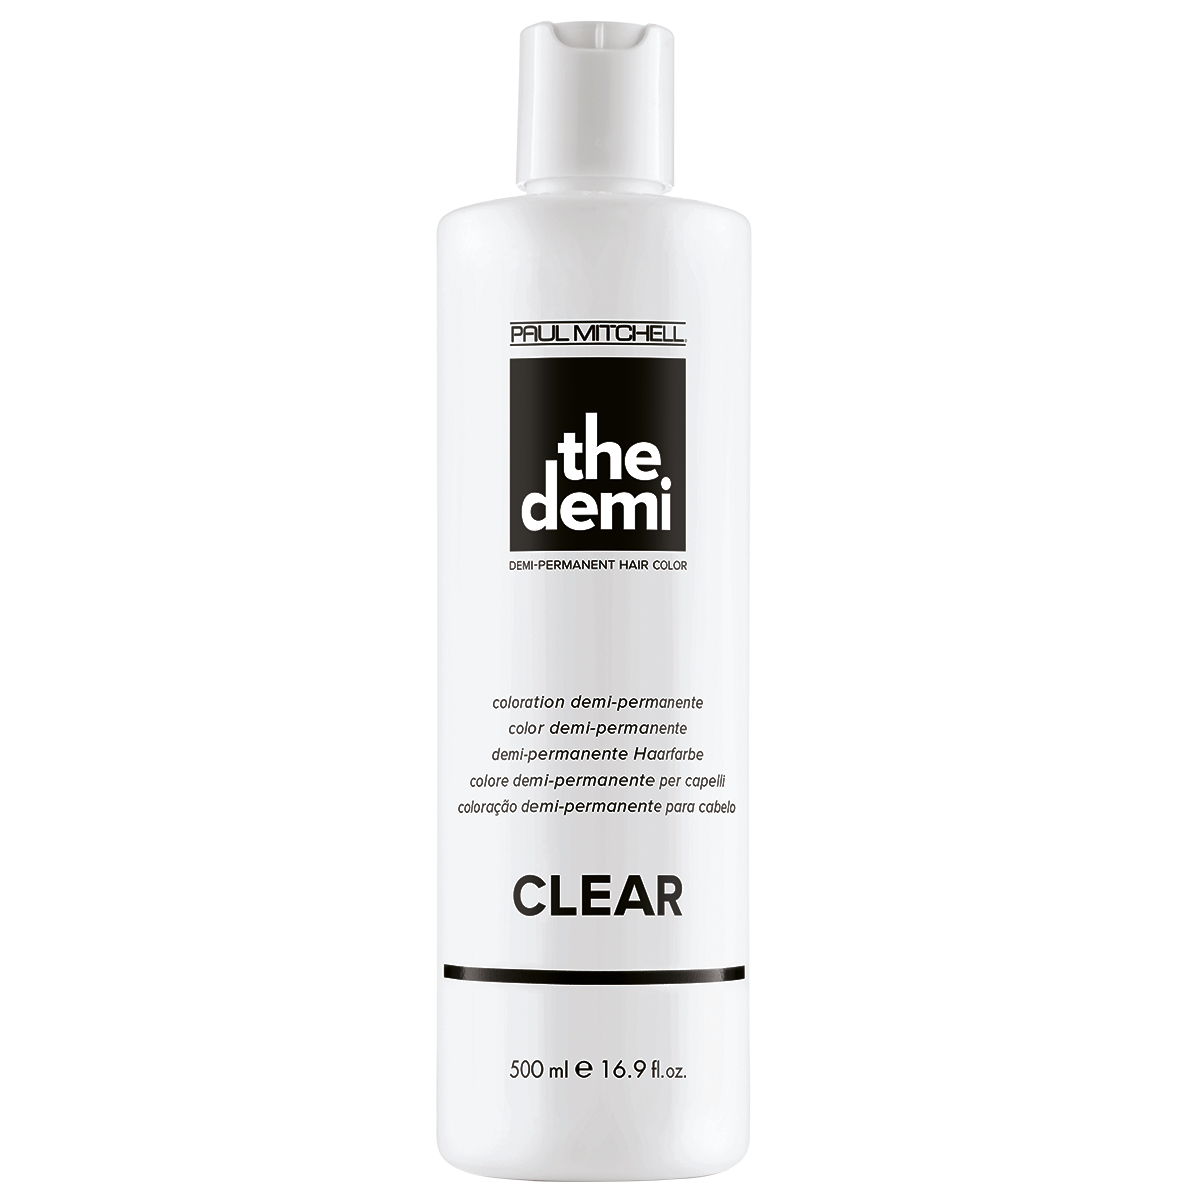 the demi - CLEAR